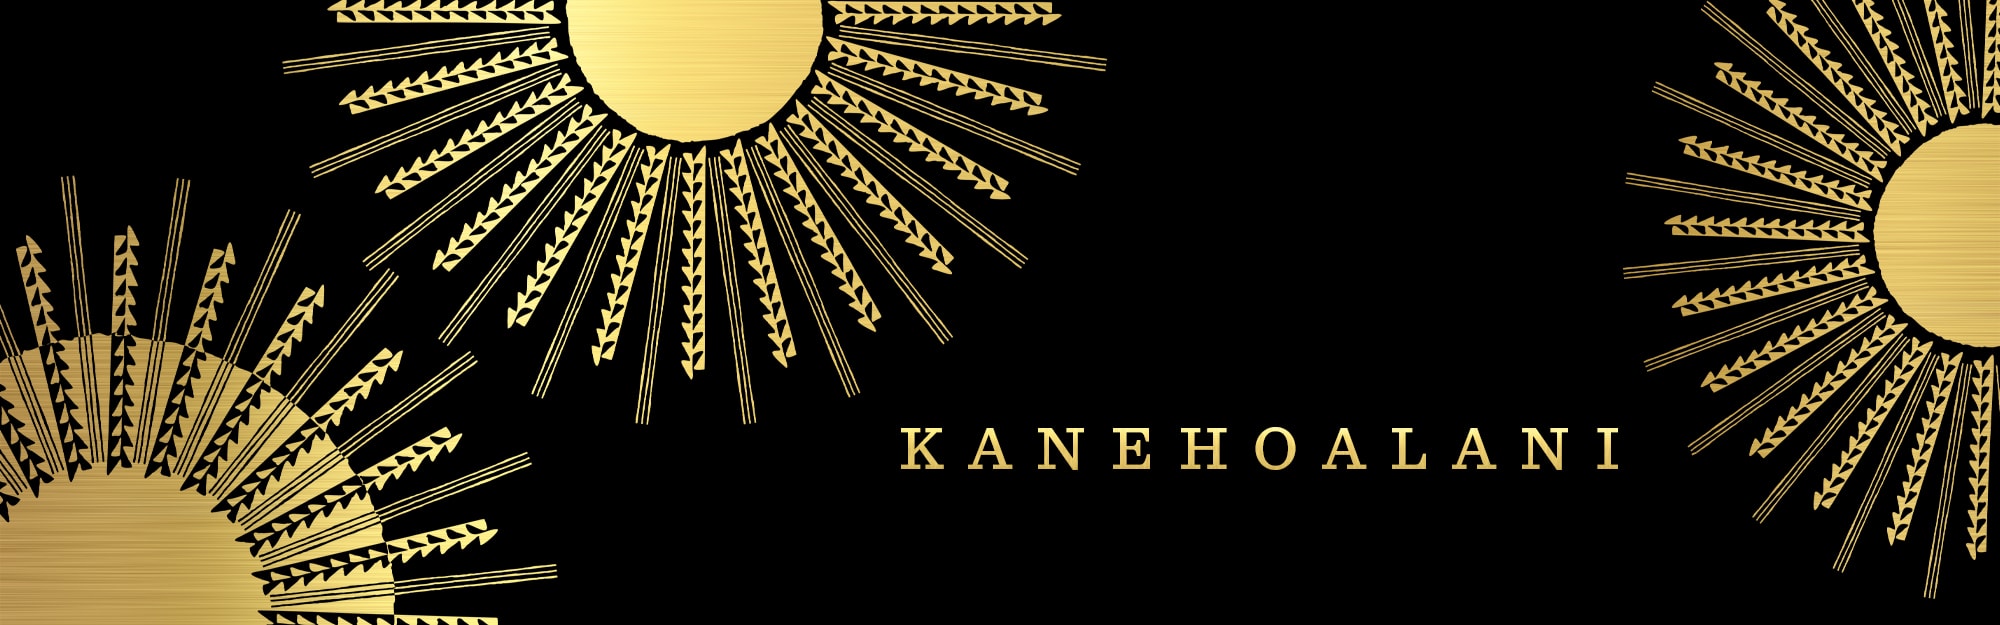 Kanehoalani Banner on a black background with gold lettering